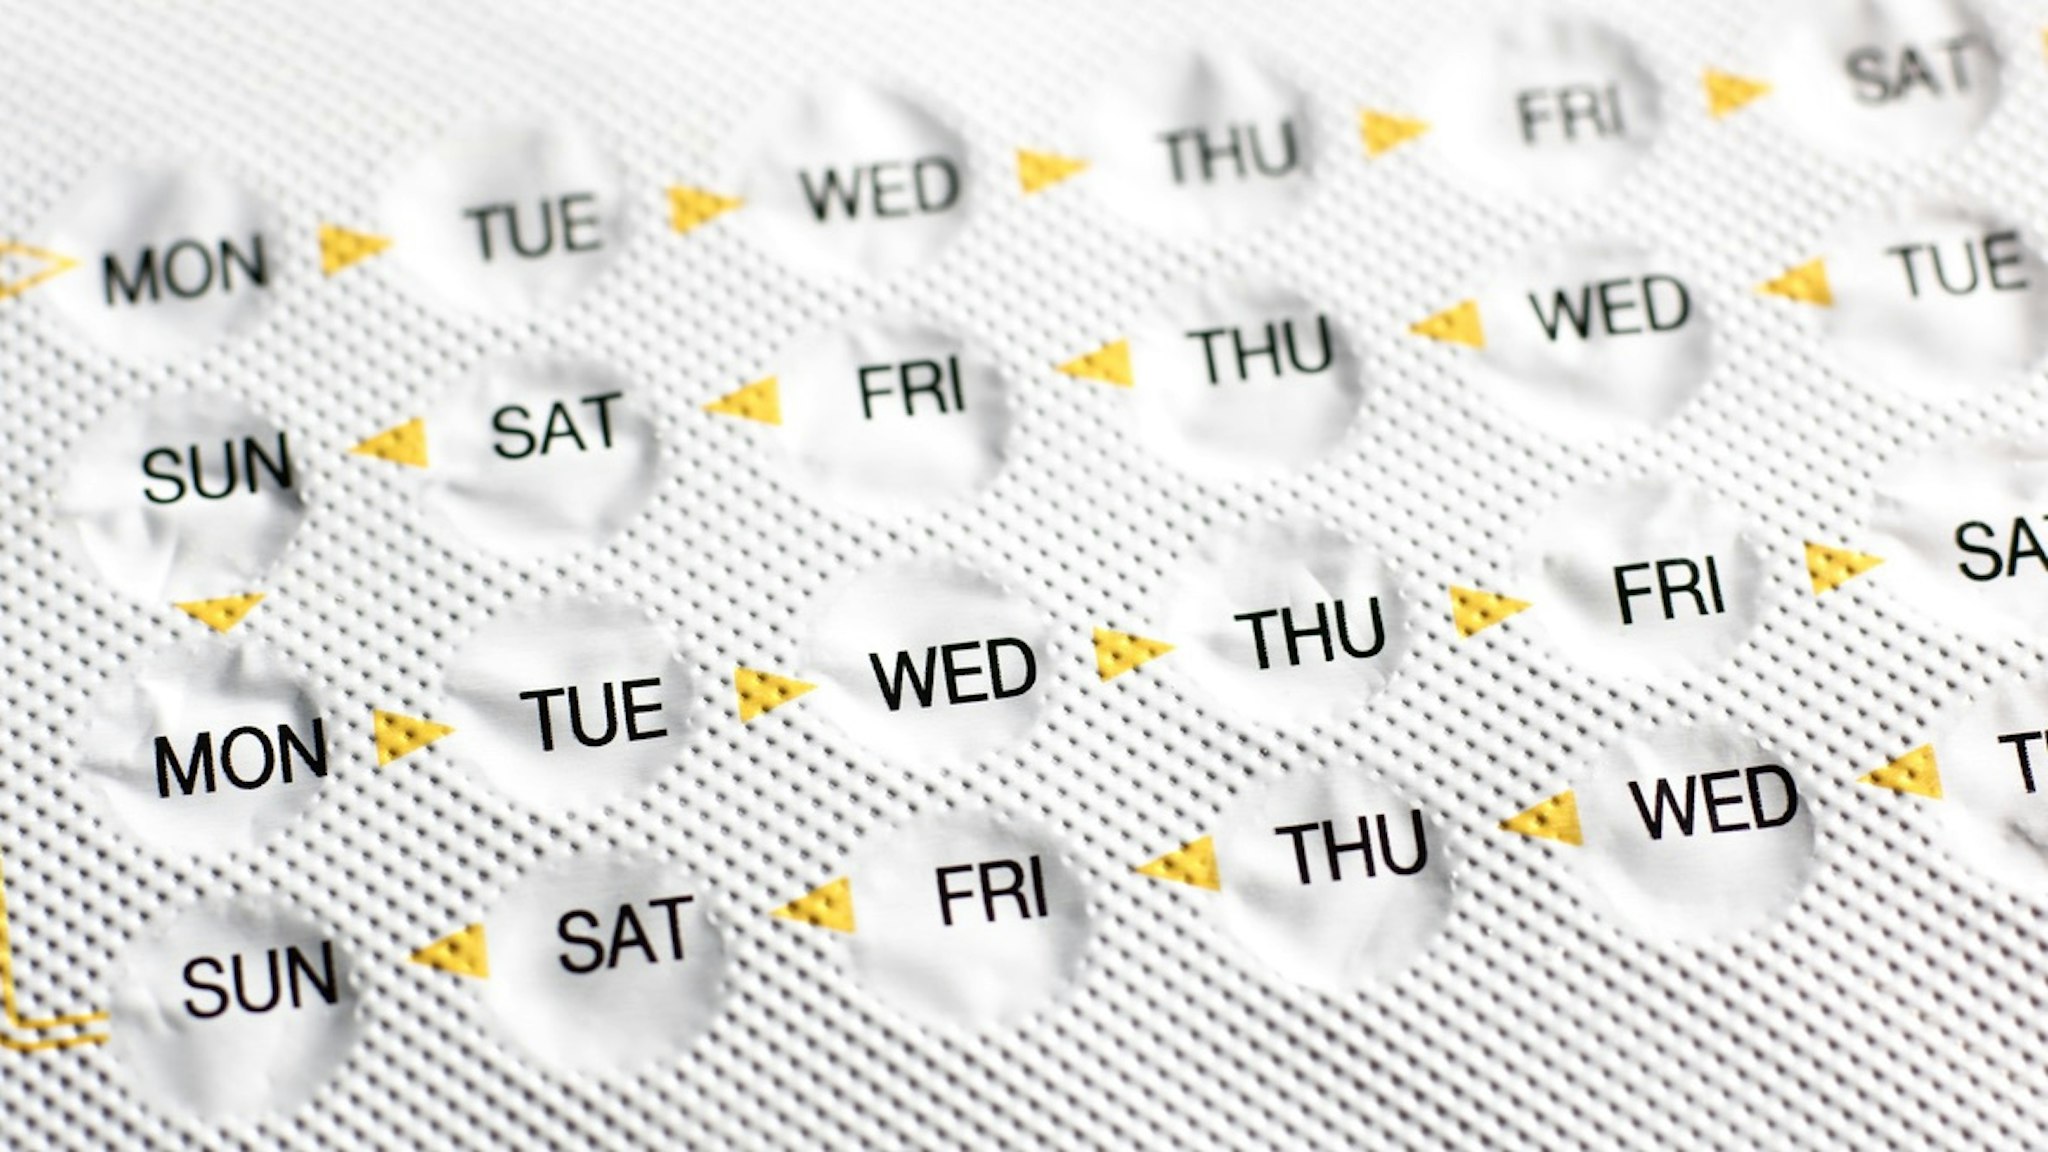 Birth control pills blister pack - stock photo Peter Dazeley via Getty Images